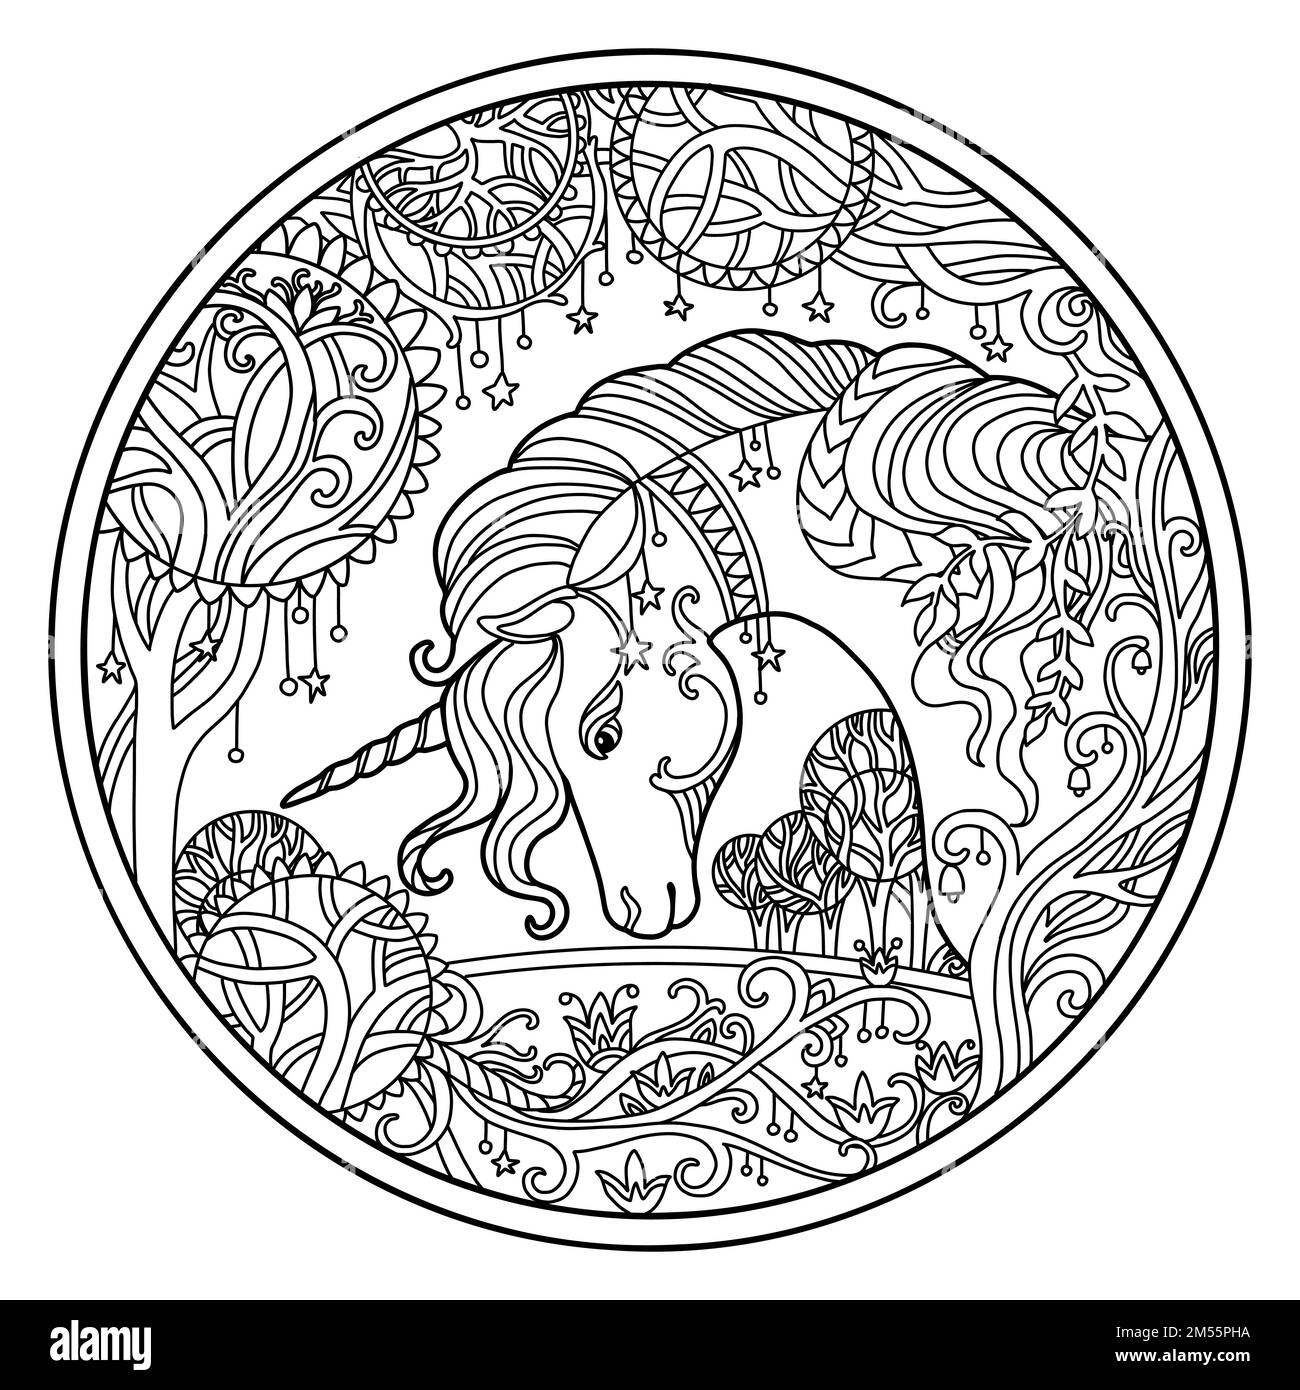 Unicorn in flower frame round shape. Hand drawing horse in magic forest for coloring book, tattoo, design, puzzle, print, decor. Stylized vector illus Stock Vector